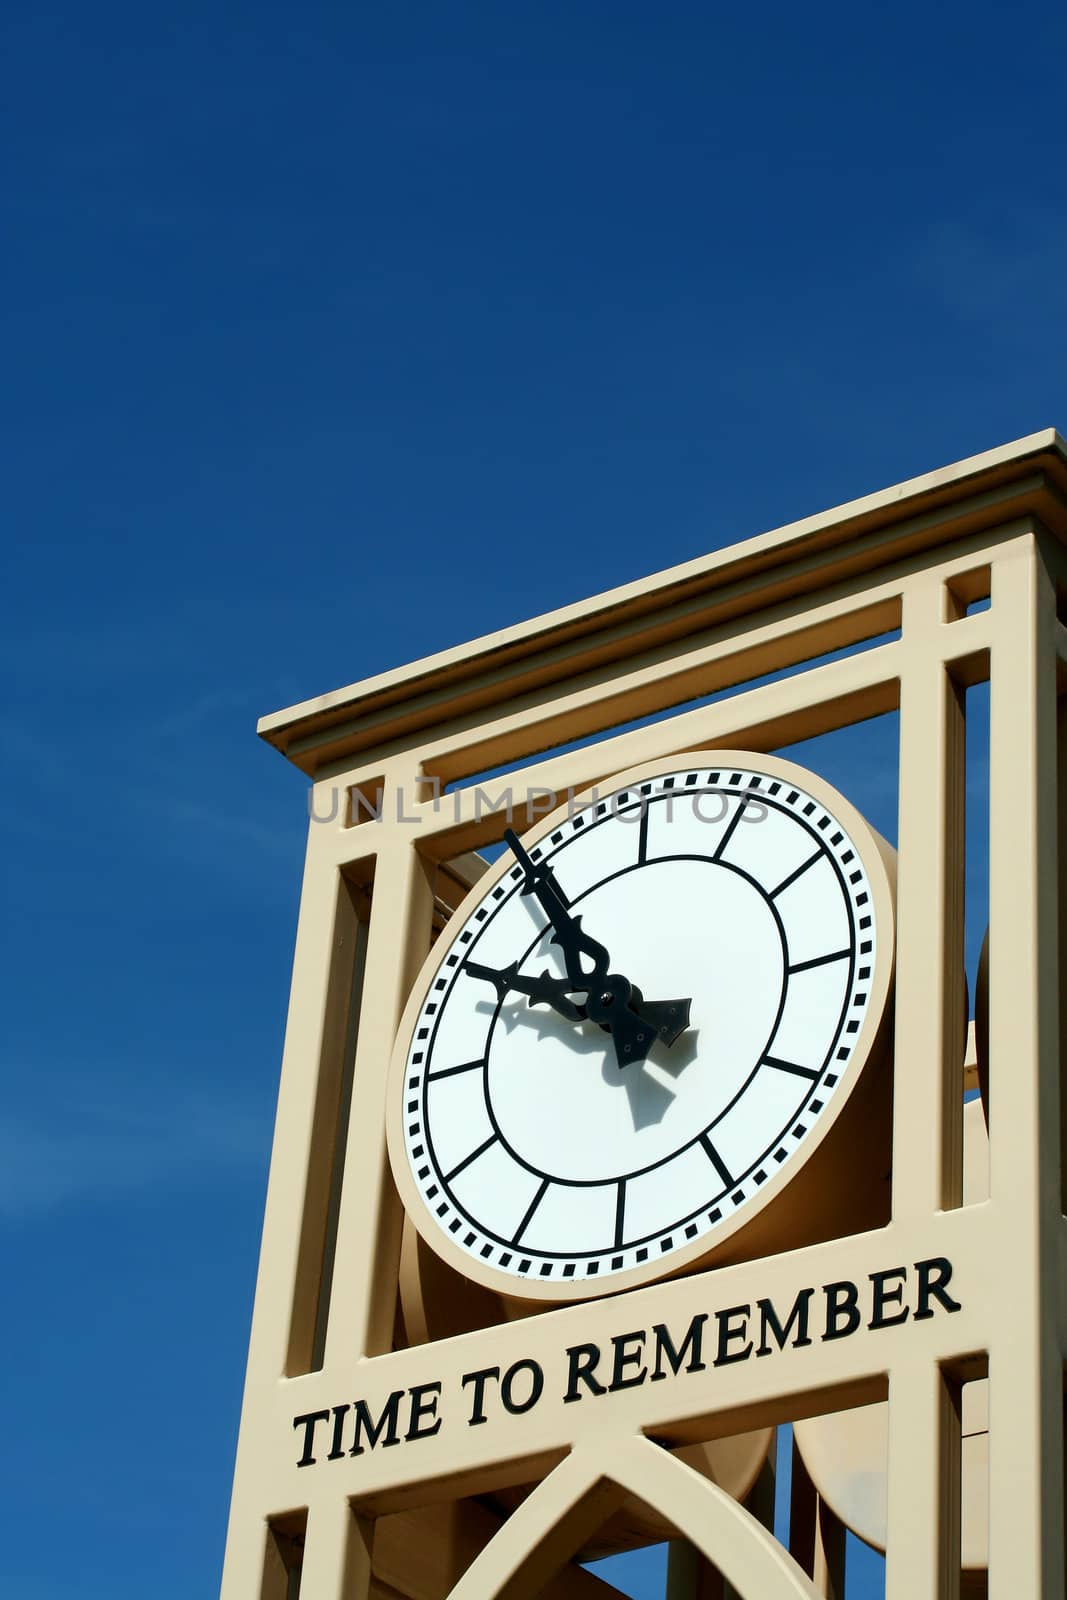 A Time to remember clock